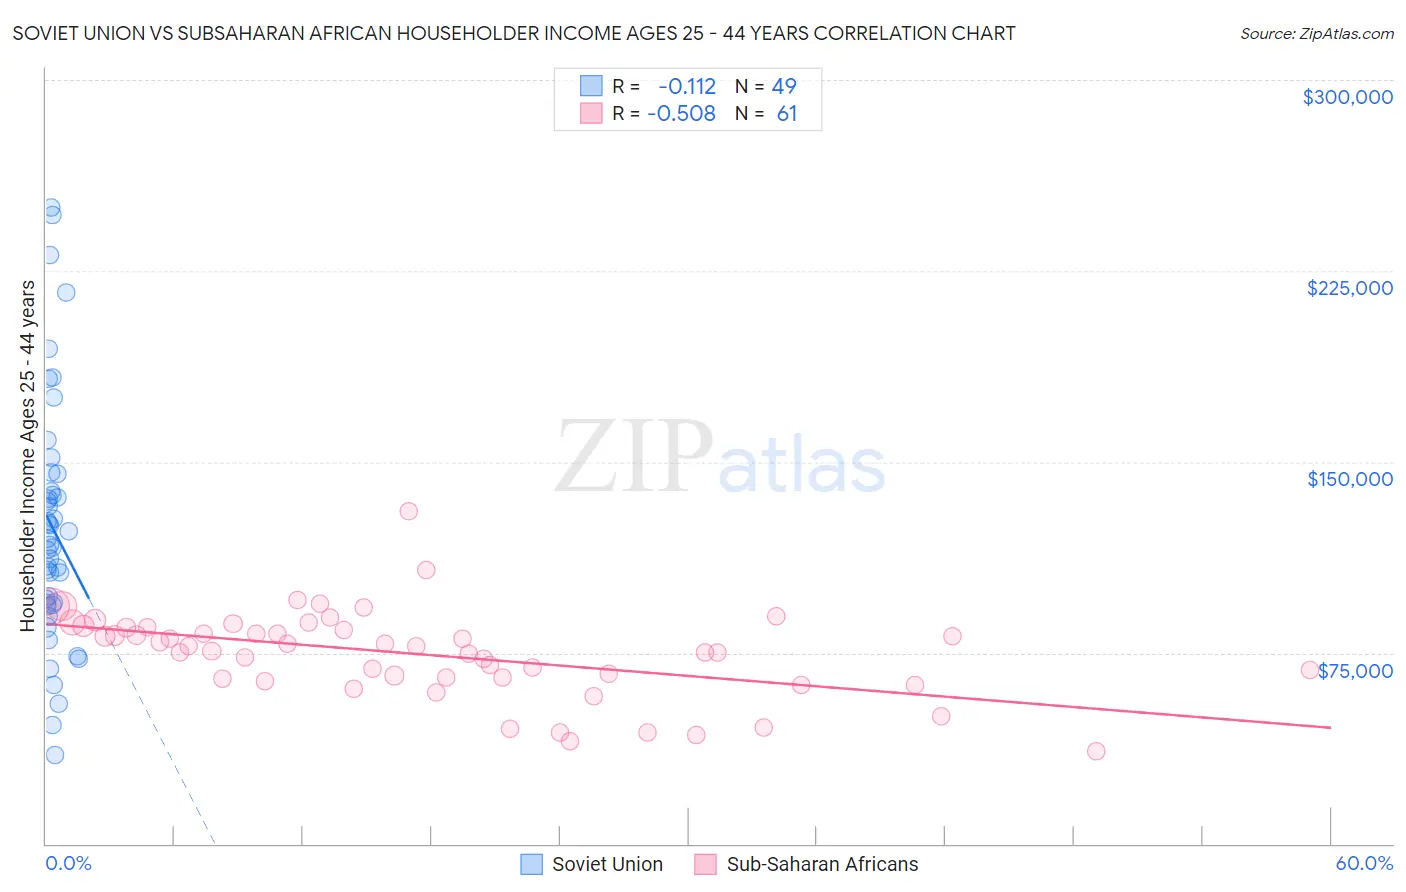 Soviet Union vs Subsaharan African Householder Income Ages 25 - 44 years